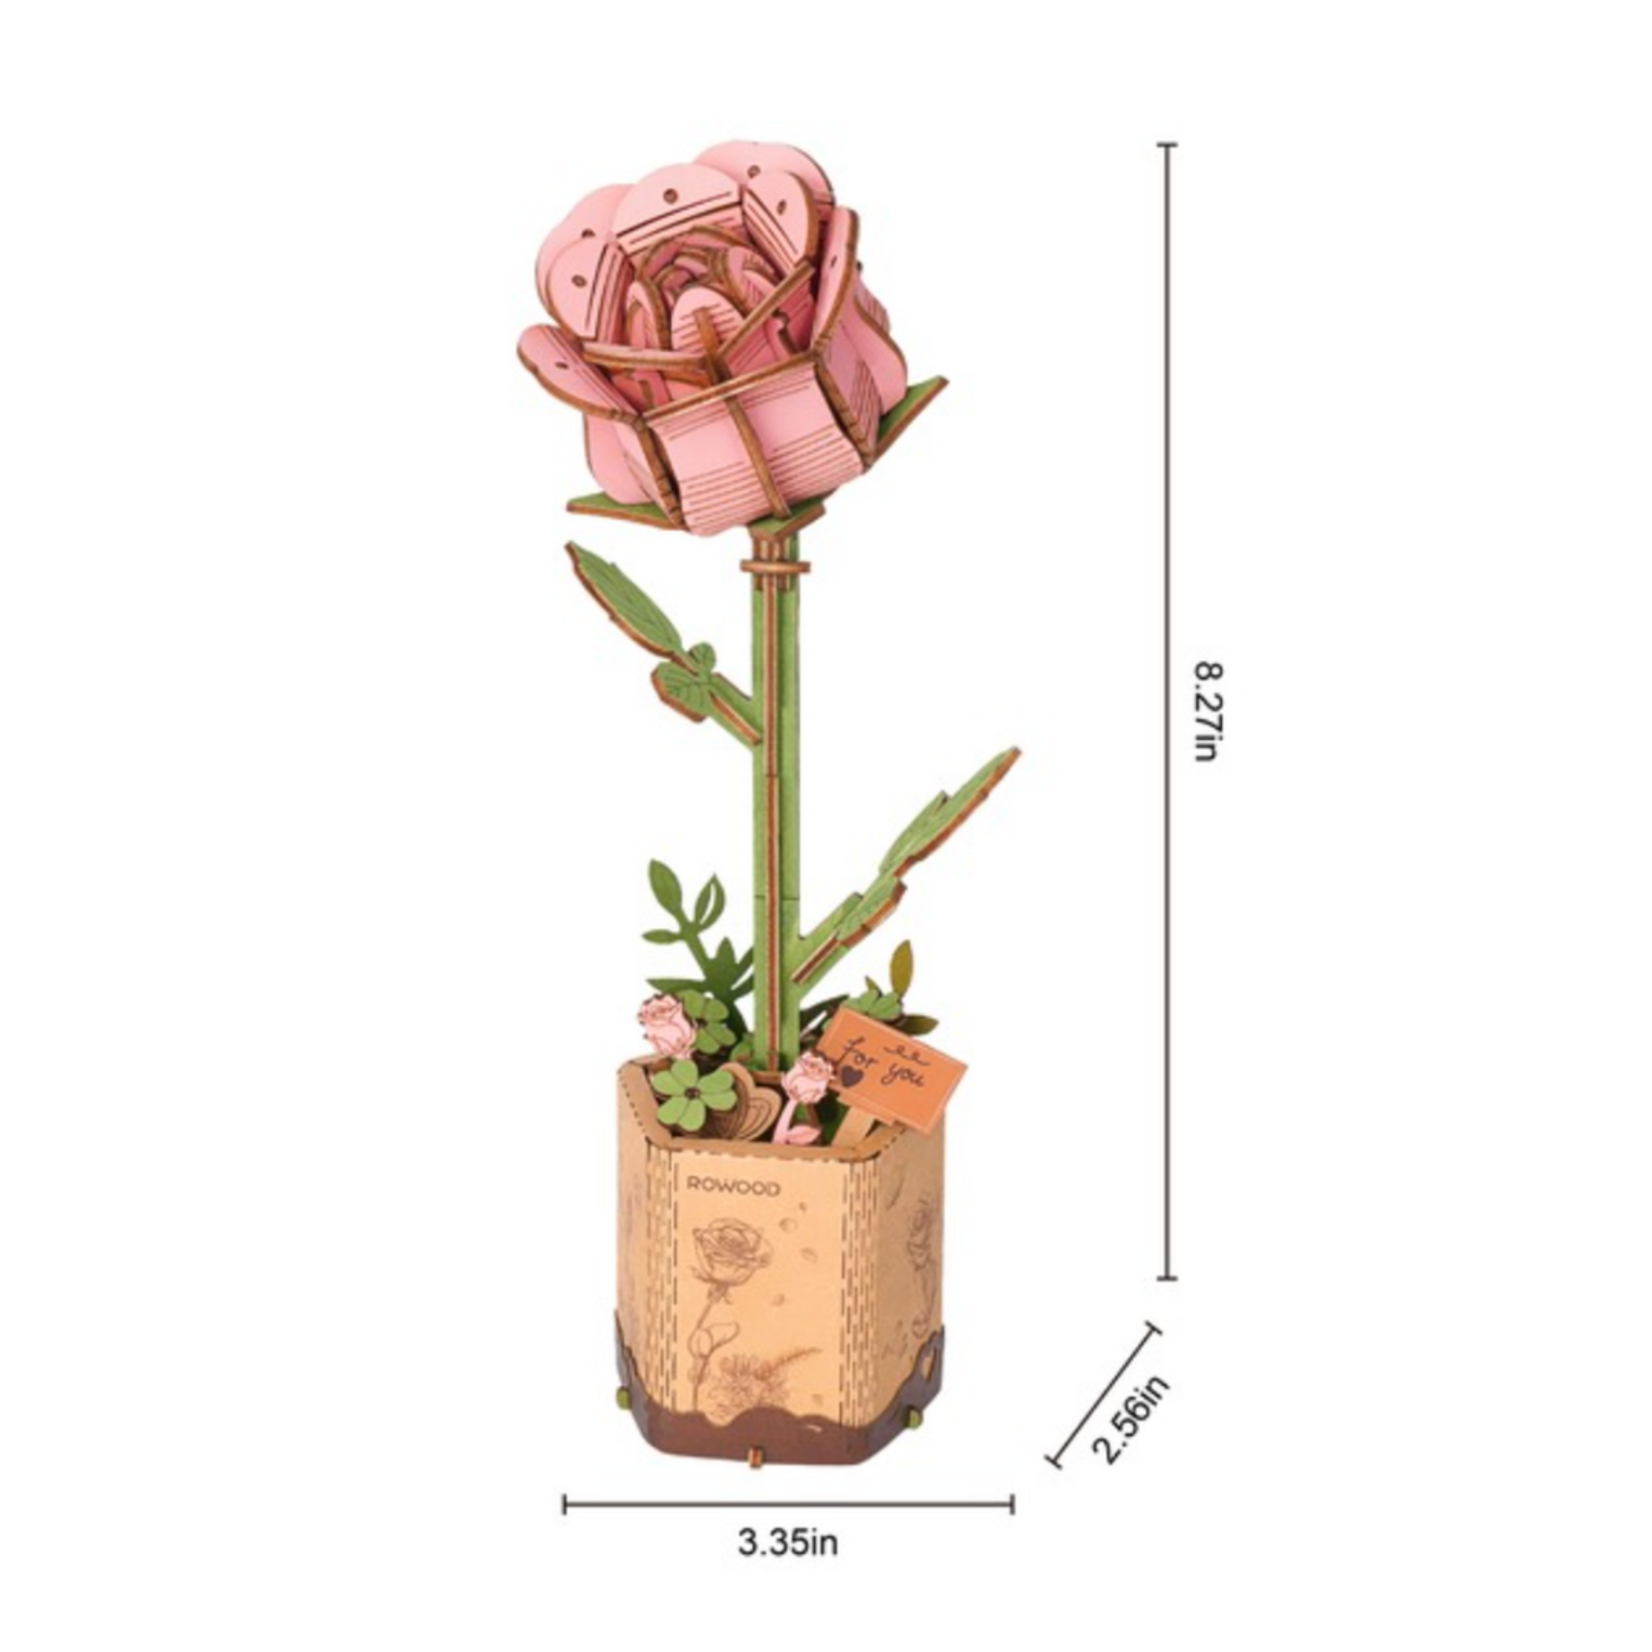 HANDS CRAFT 3D WOOD PUZZLE PINK ROSE